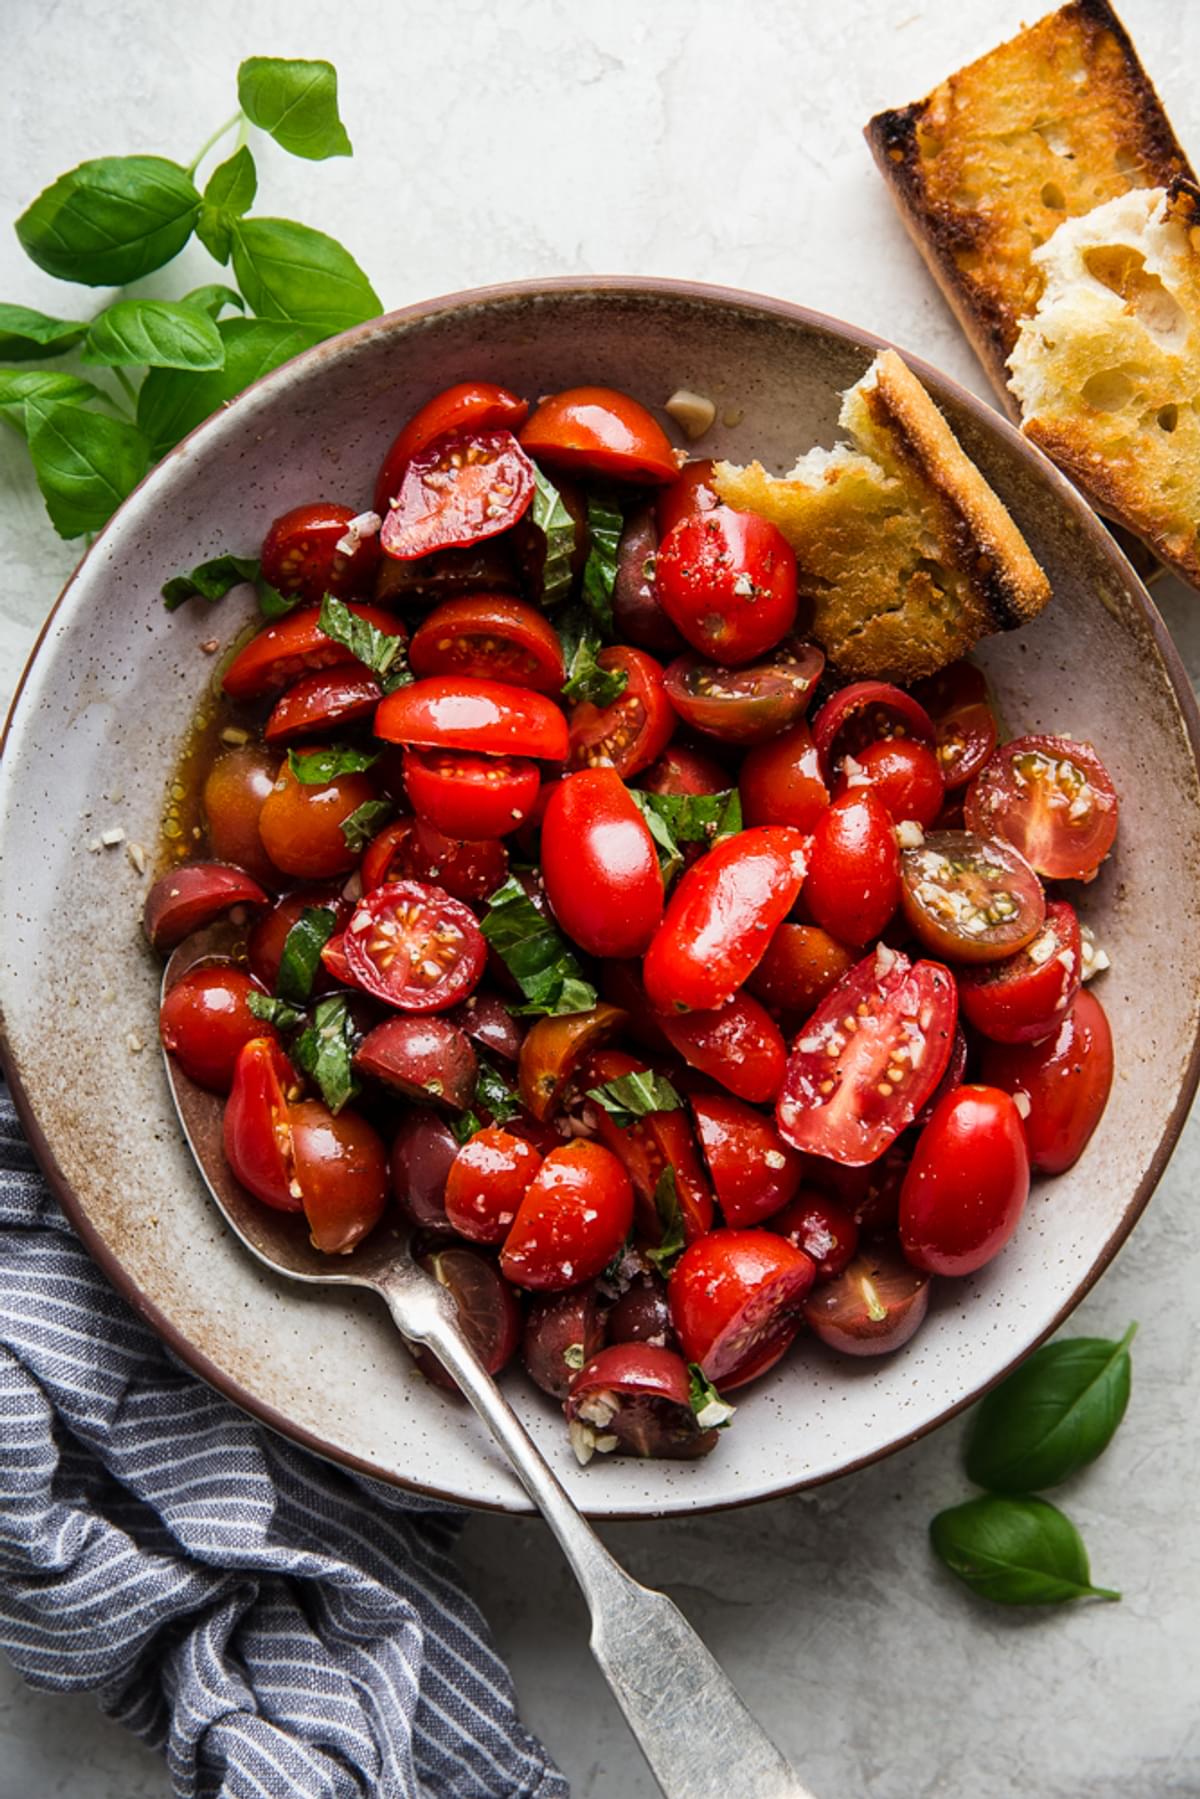 tomato salad with cherry tomatoes, balsamic, salt and garlic, lemon, basil, pepper and olive oil in a bowl with bread